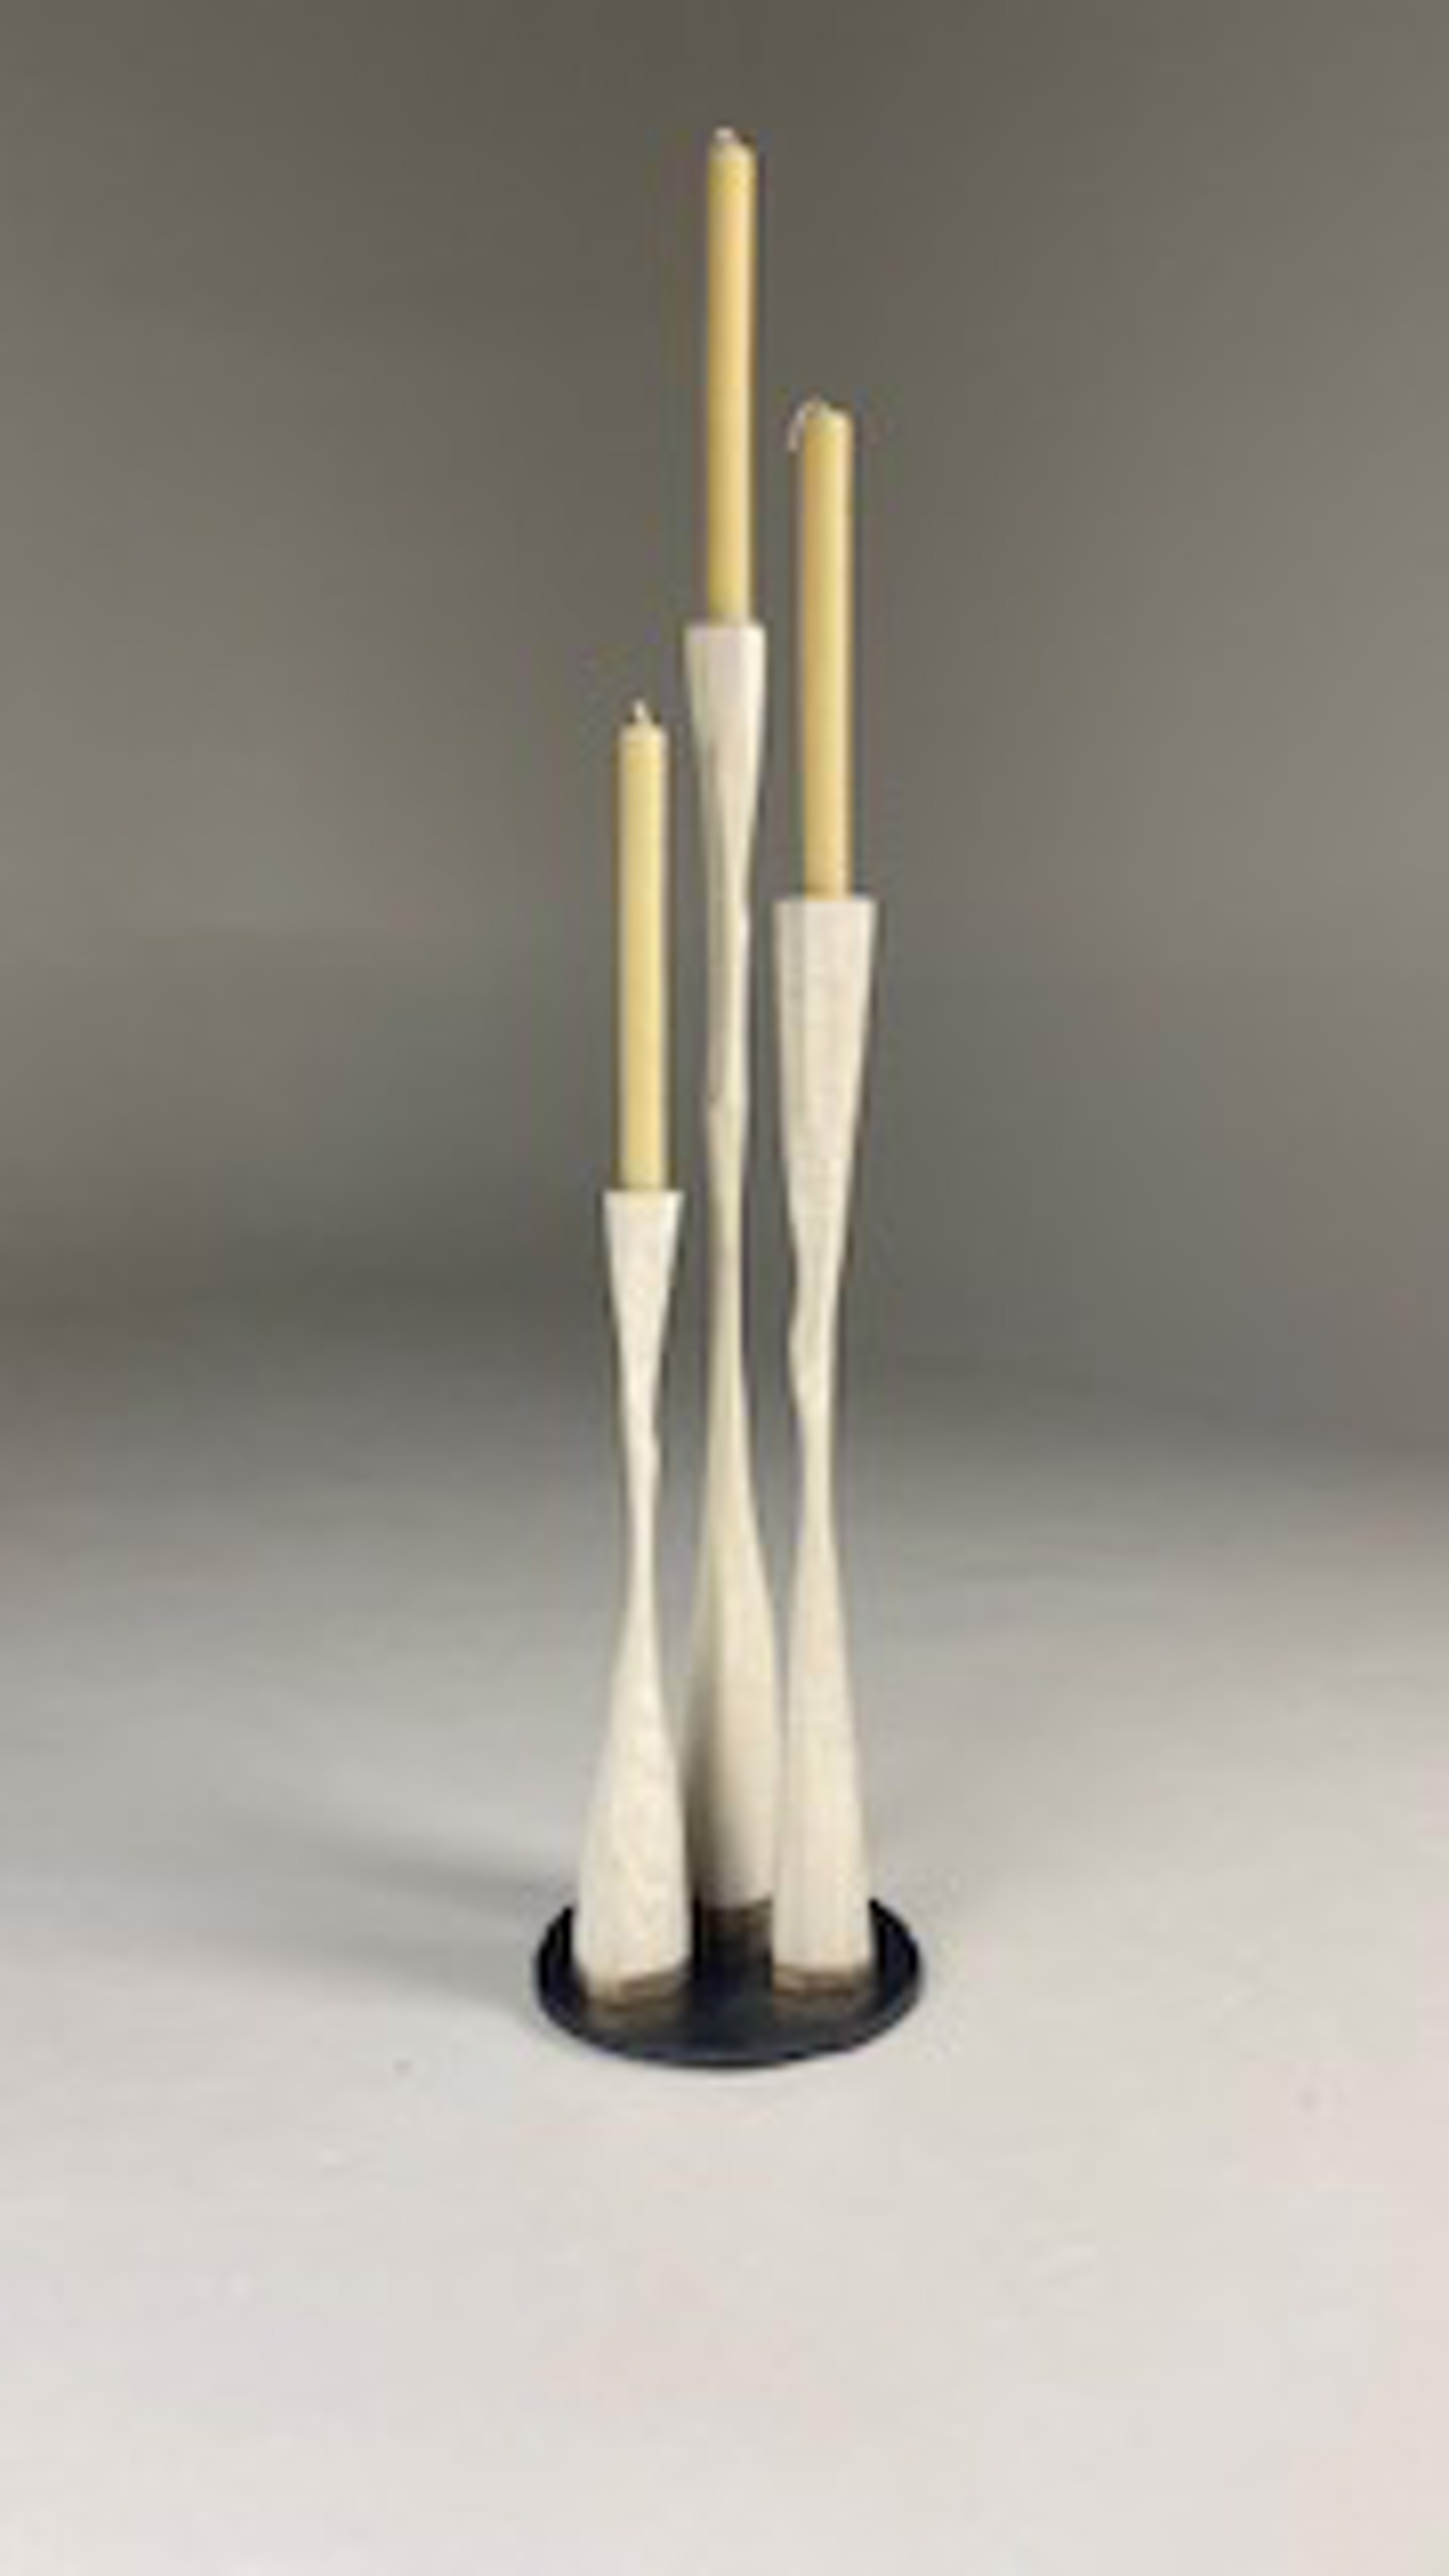 Set of 3 Hard Carved Candlesticks - White by BAPO Designs